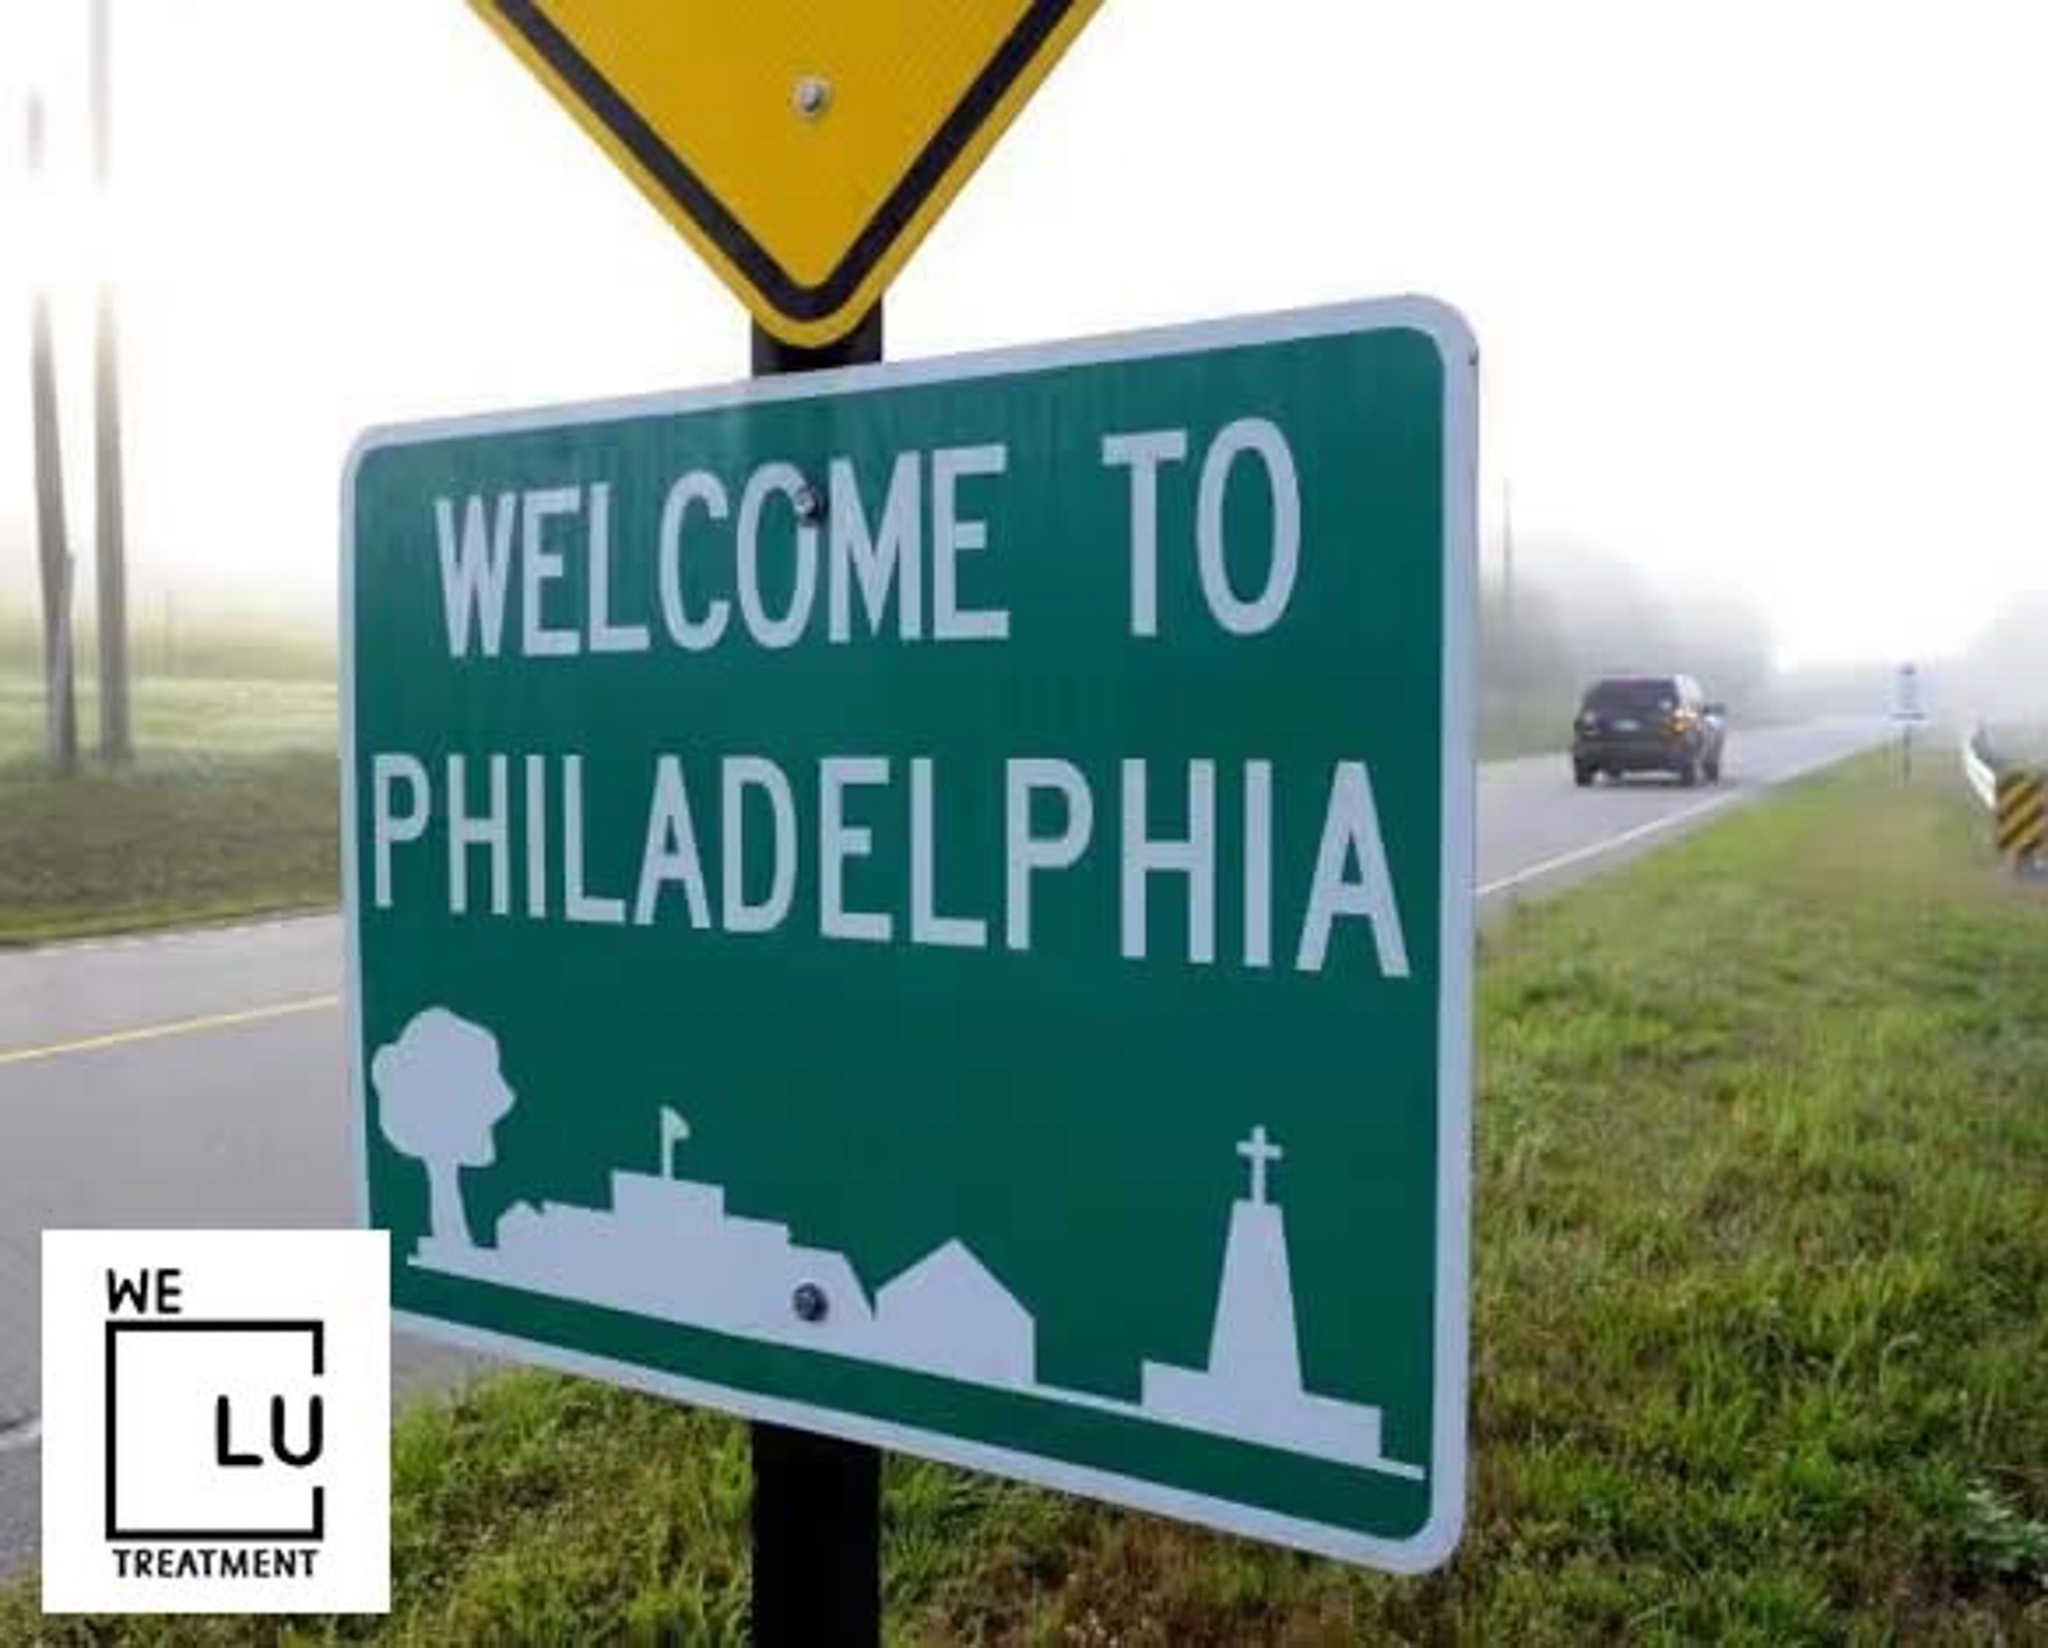 Philadelphia PA We Level Up treatment center for drug and alcohol rehab detox and mental health services - Image 1